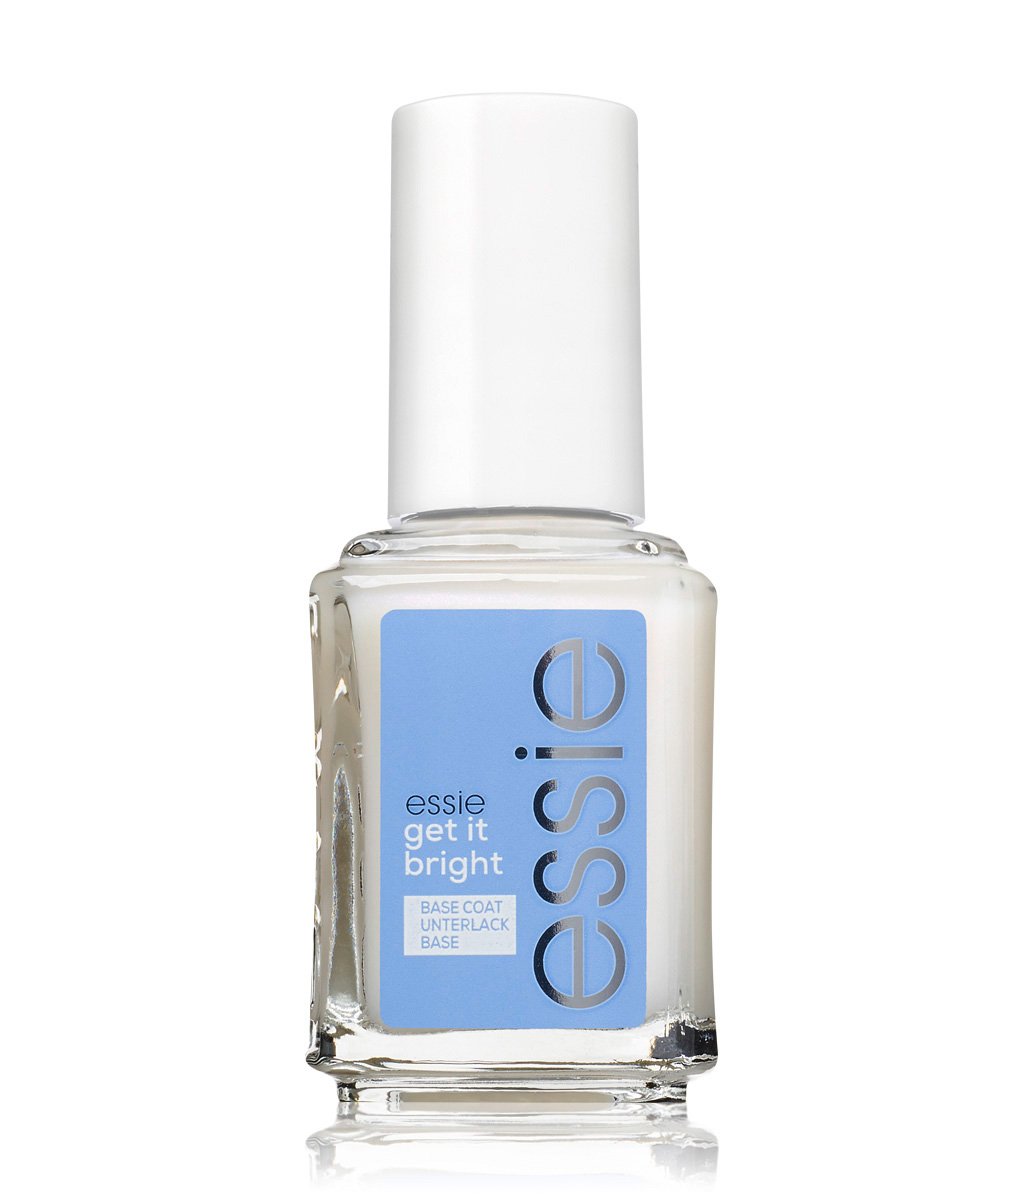 The Latest Essie exclusive Coat Shop Bright Nail Get Care Base It at